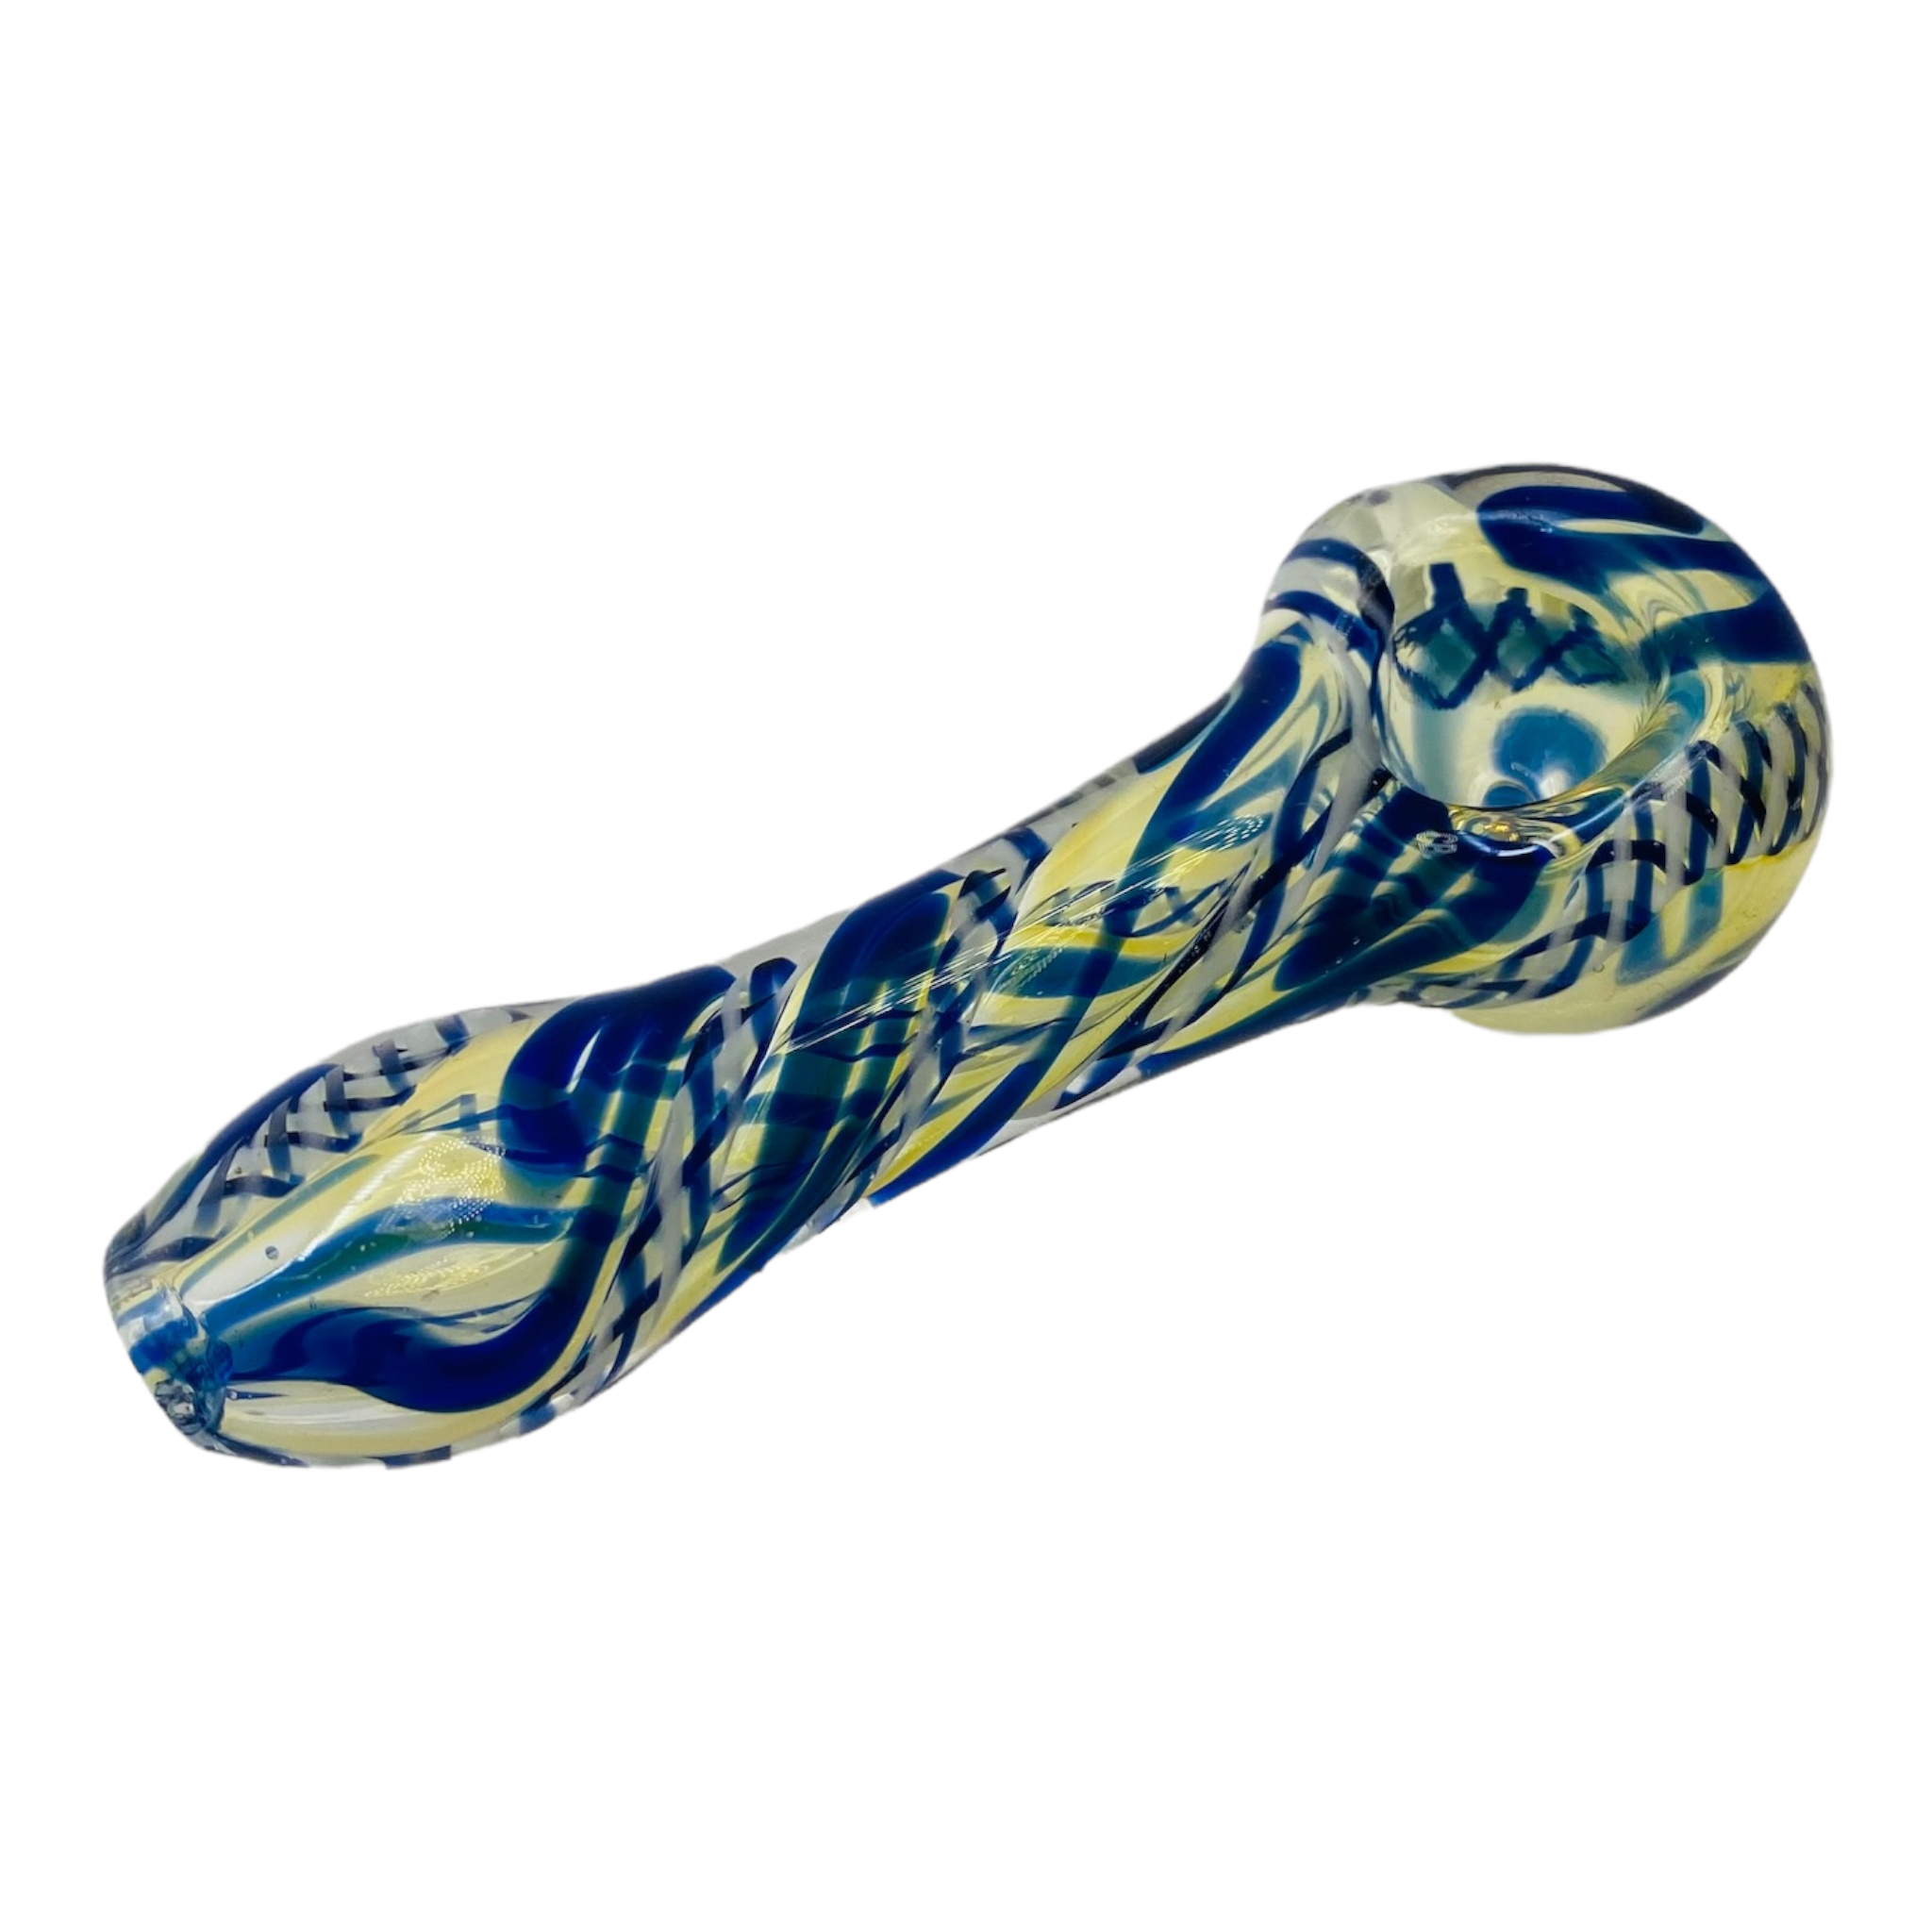 selection of hand pipes made from glass, ceramic, metal, antlers, palm seeds, and more